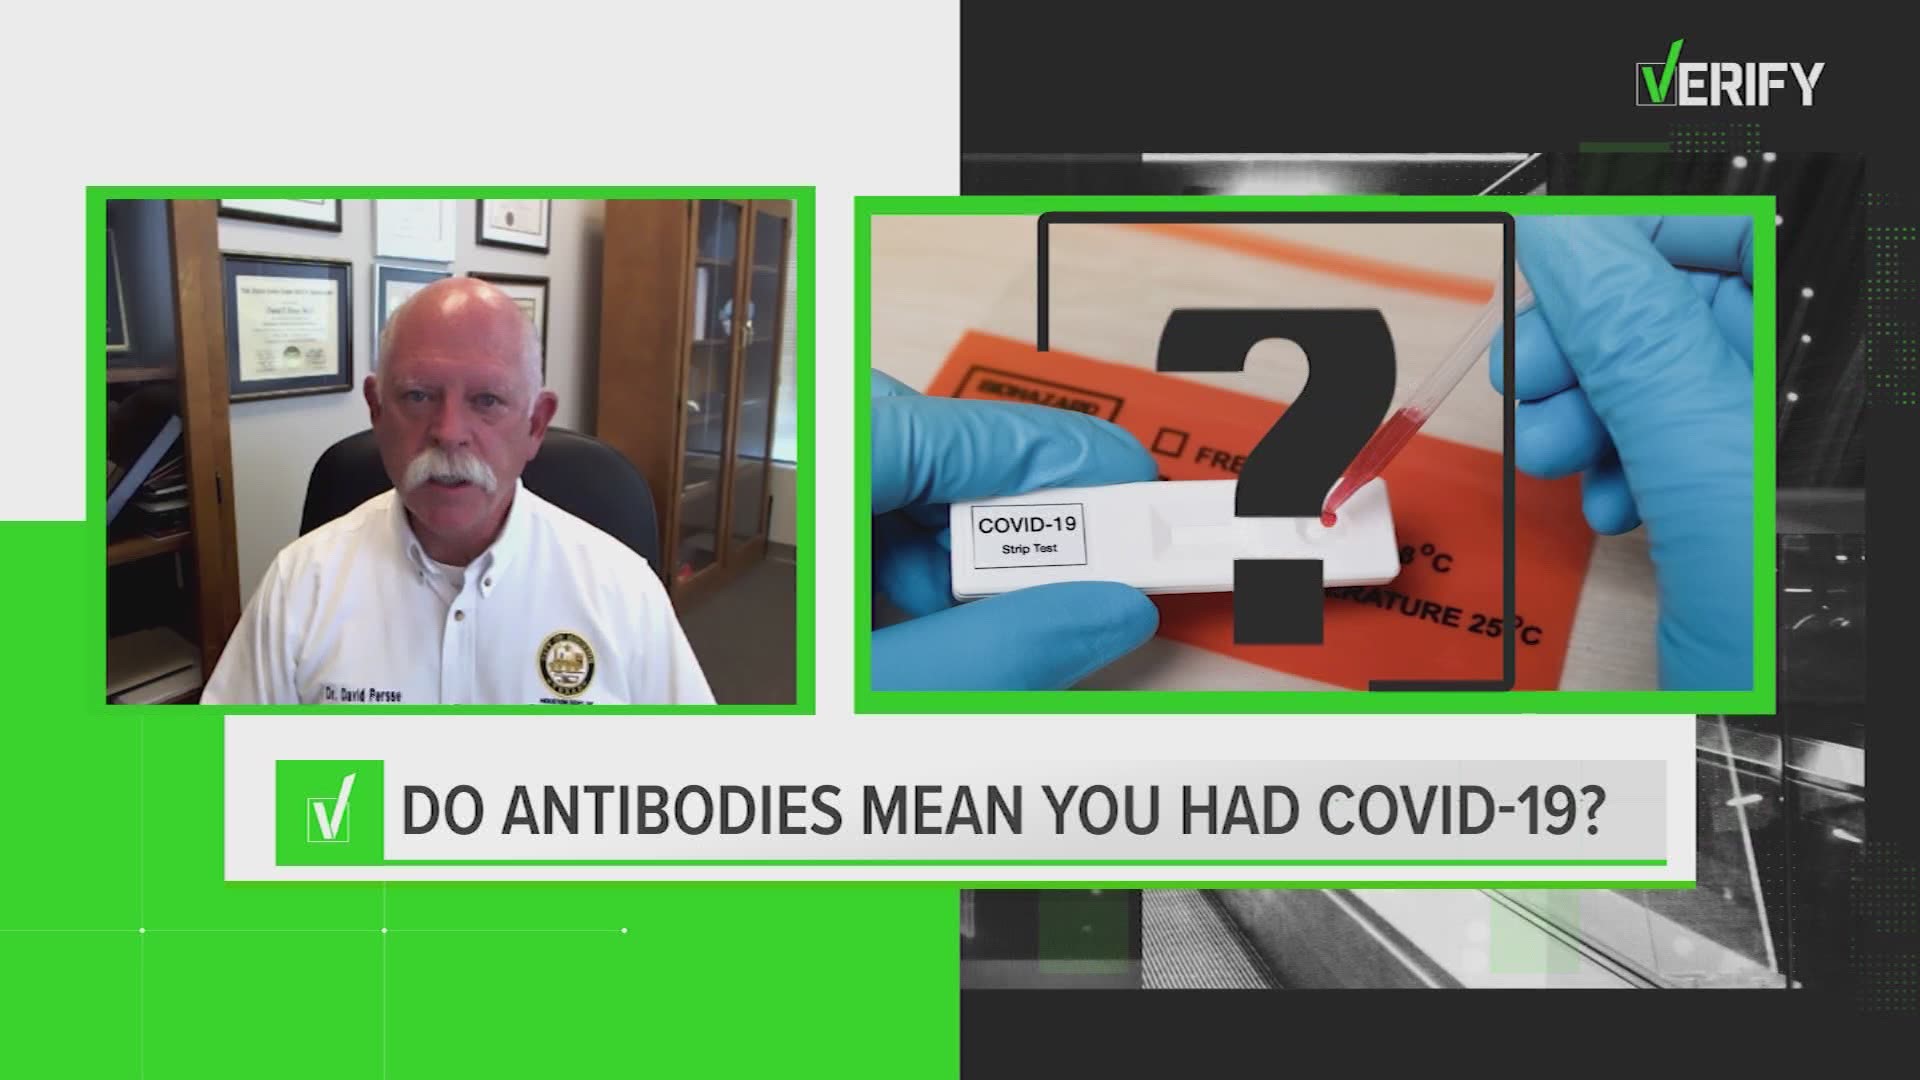 Many viewers have sent us various questions about testing for COVID-19 antibodies. Houston Health Authority Dr. David Persse responded.